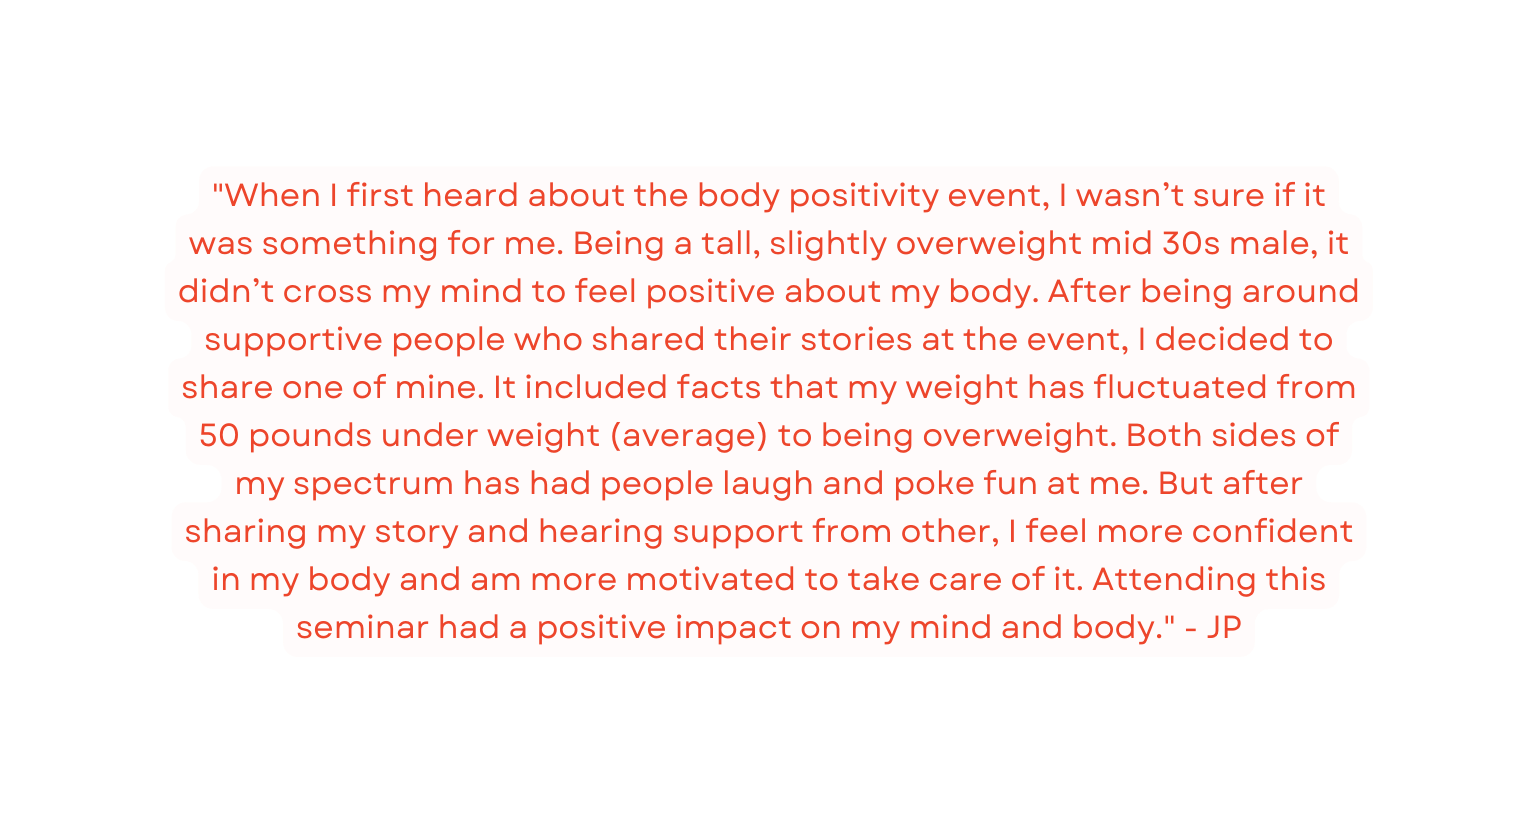 When I first heard about the body positivity event I wasn t sure if it was something for me Being a tall slightly overweight mid 30s male it didn t cross my mind to feel positive about my body After being around supportive people who shared their stories at the event I decided to share one of mine It included facts that my weight has fluctuated from 50 pounds under weight average to being overweight Both sides of my spectrum has had people laugh and poke fun at me But after sharing my story and hearing support from other I feel more confident in my body and am more motivated to take care of it Attending this seminar had a positive impact on my mind and body JP